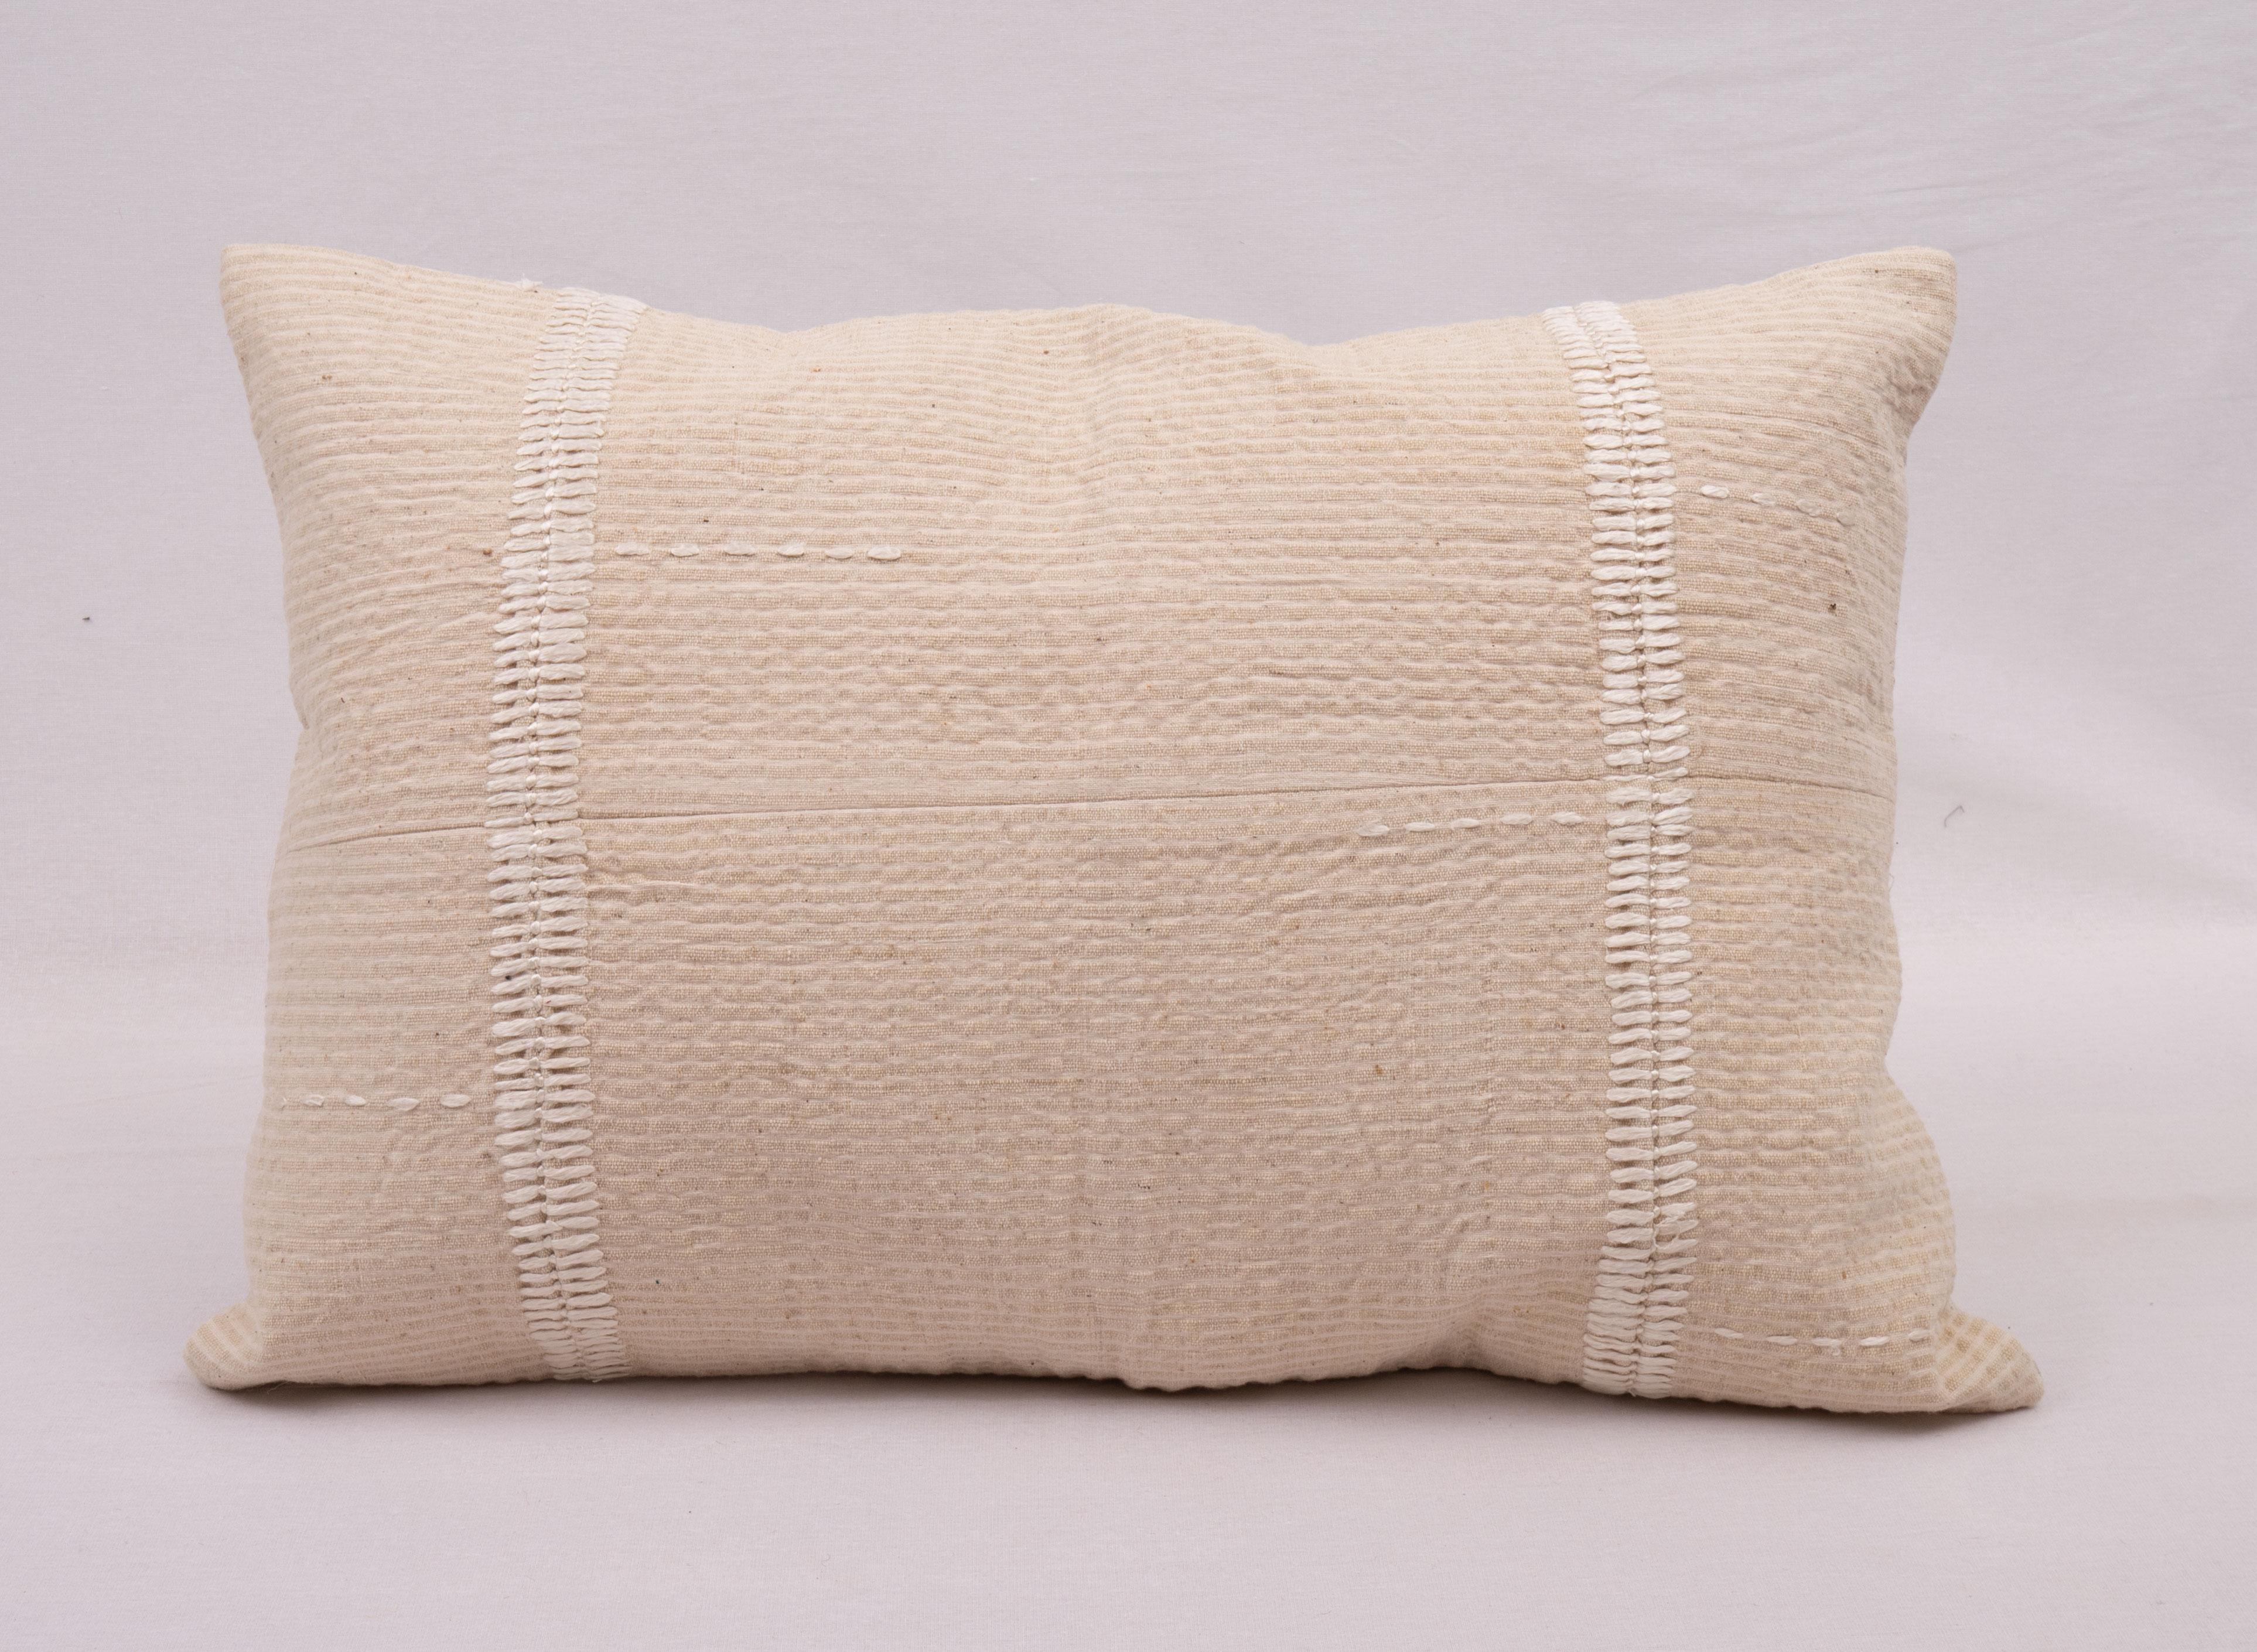 This pillow case is made from a vintage Anatolian Cotton Cover. Hand done silk stitching on it is our addition to the piece to give it a fine detail.

It does not come with inserts.
linen in the back.
Zipper closure.
Dry cleaning is